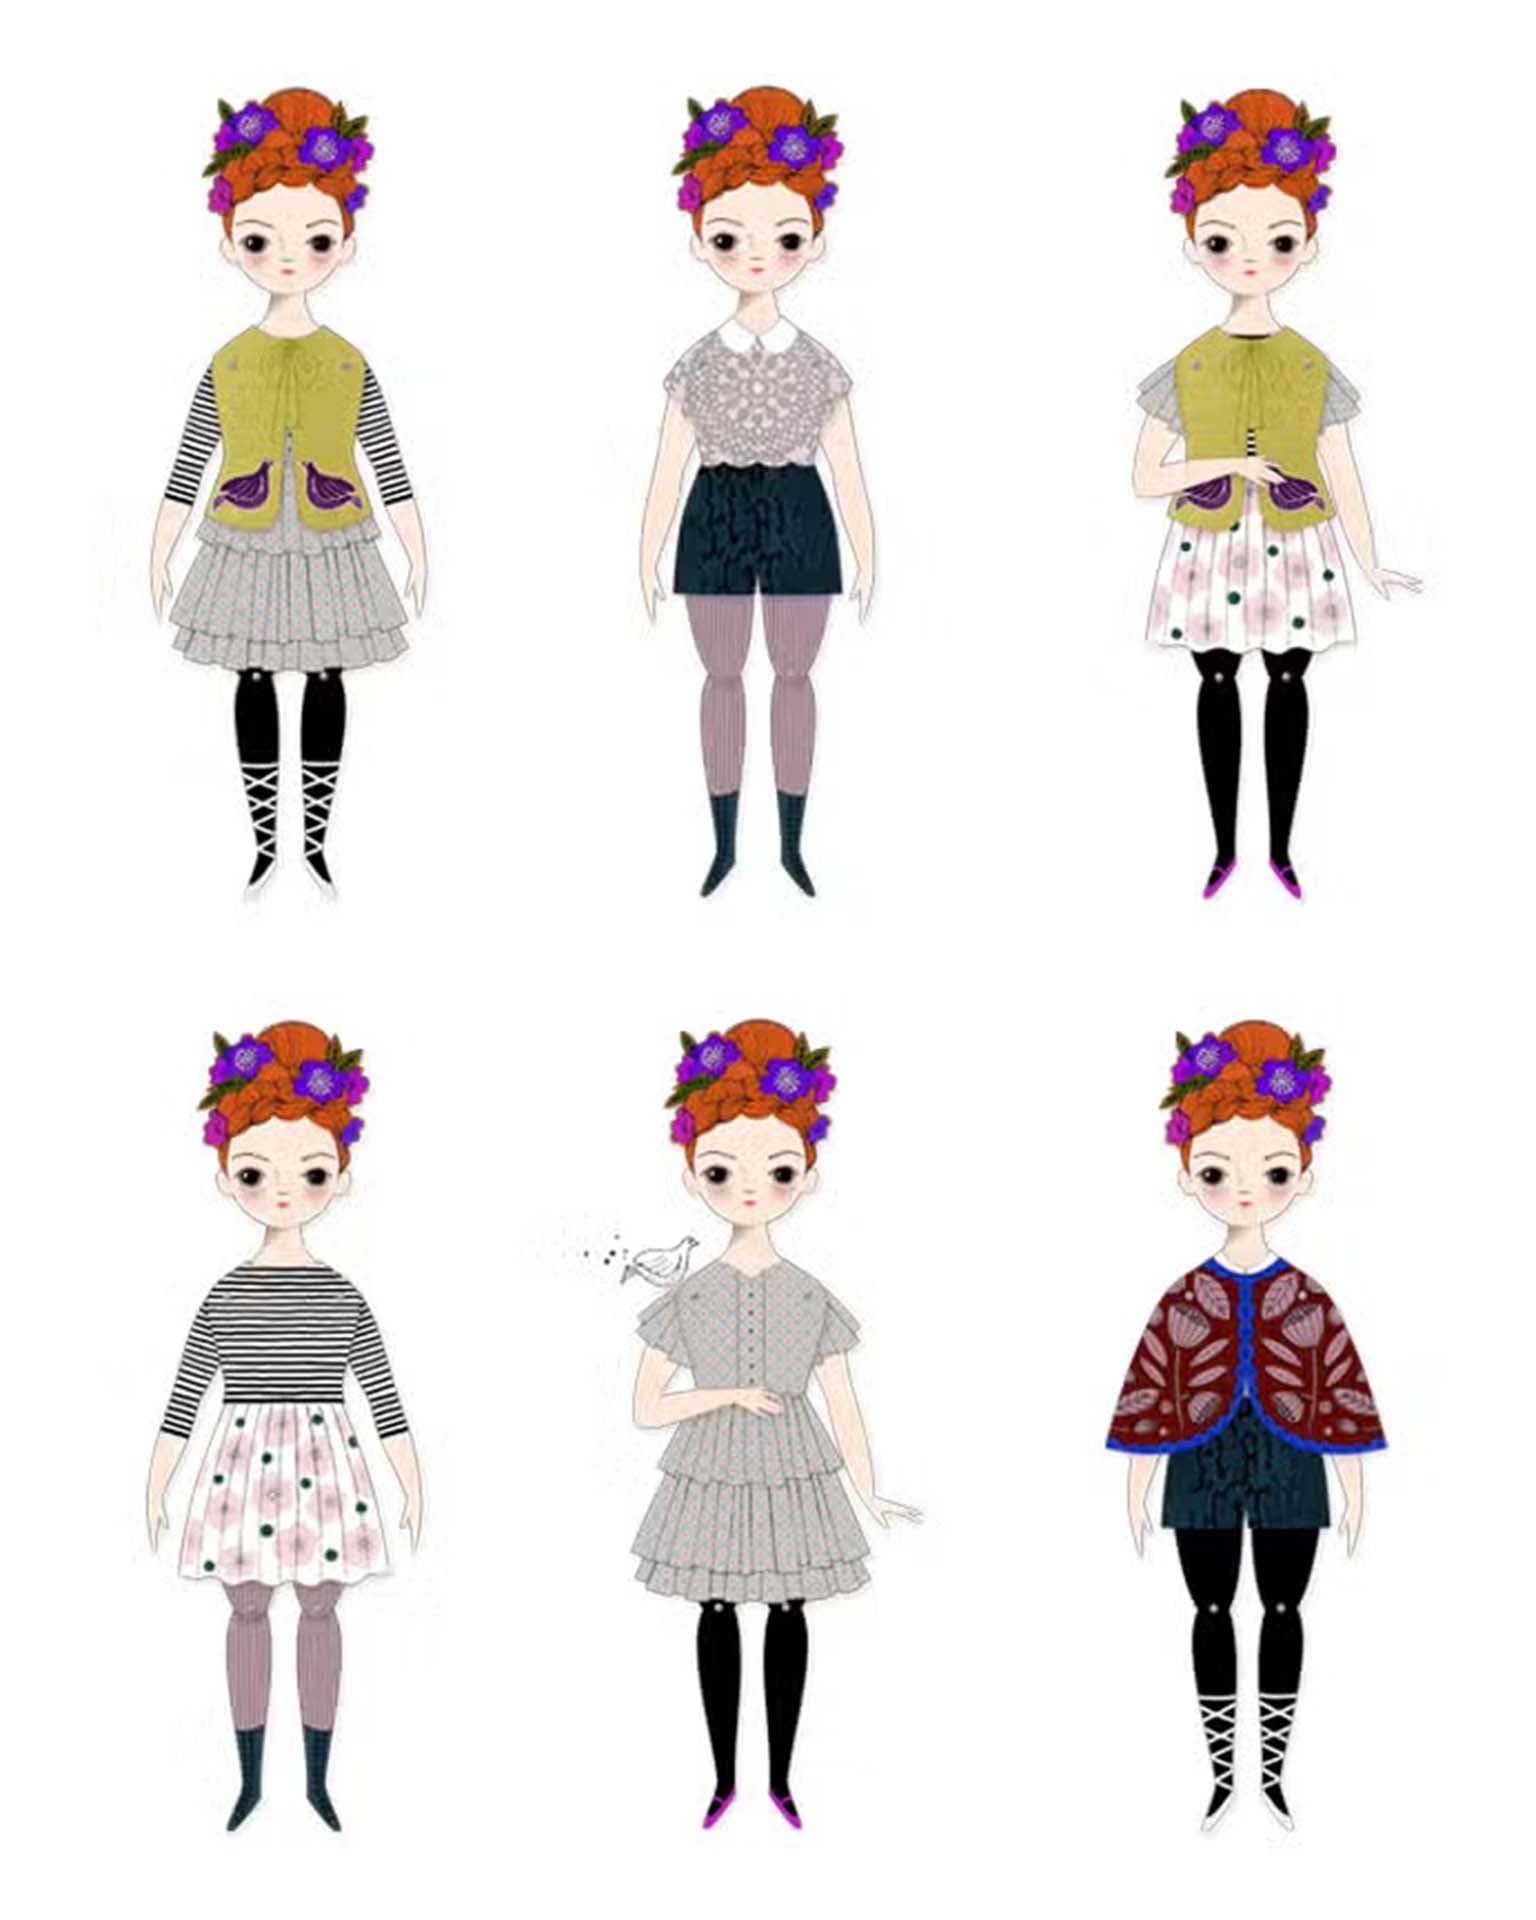 Little of unusual kind play florence paper doll kit